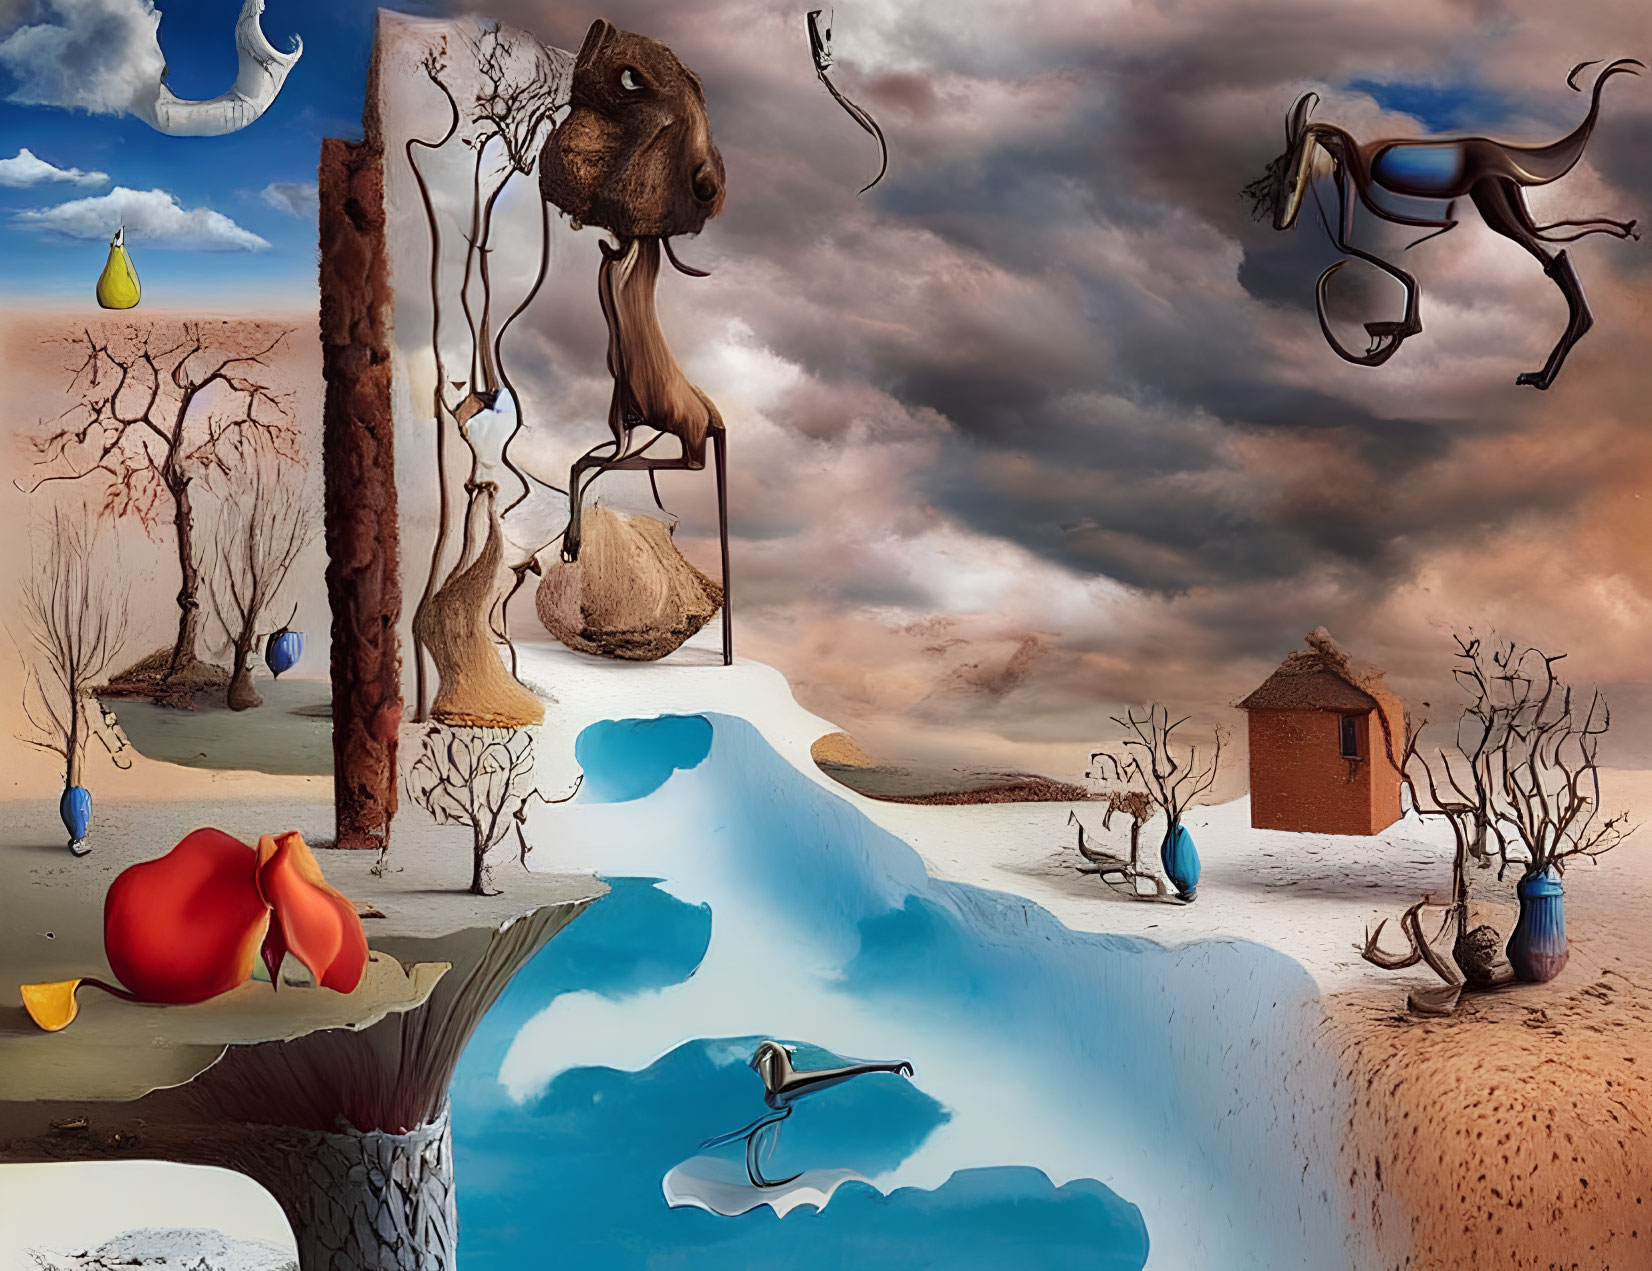 Surreal landscape featuring distorted animals, barren trees, and floating elements.